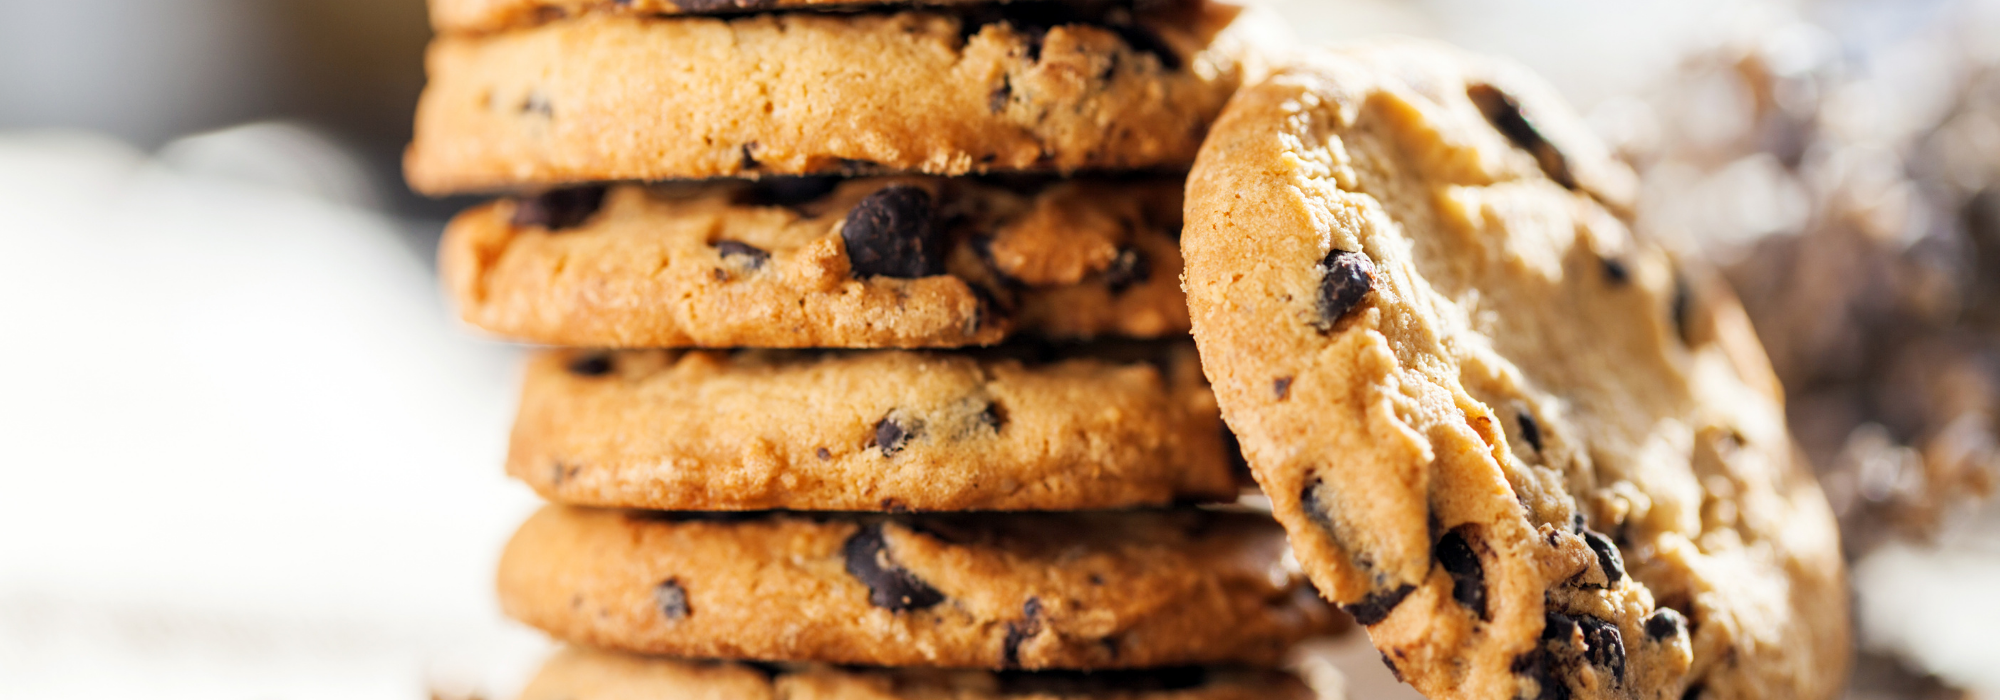 Stacked Chocolate Chip Cookies